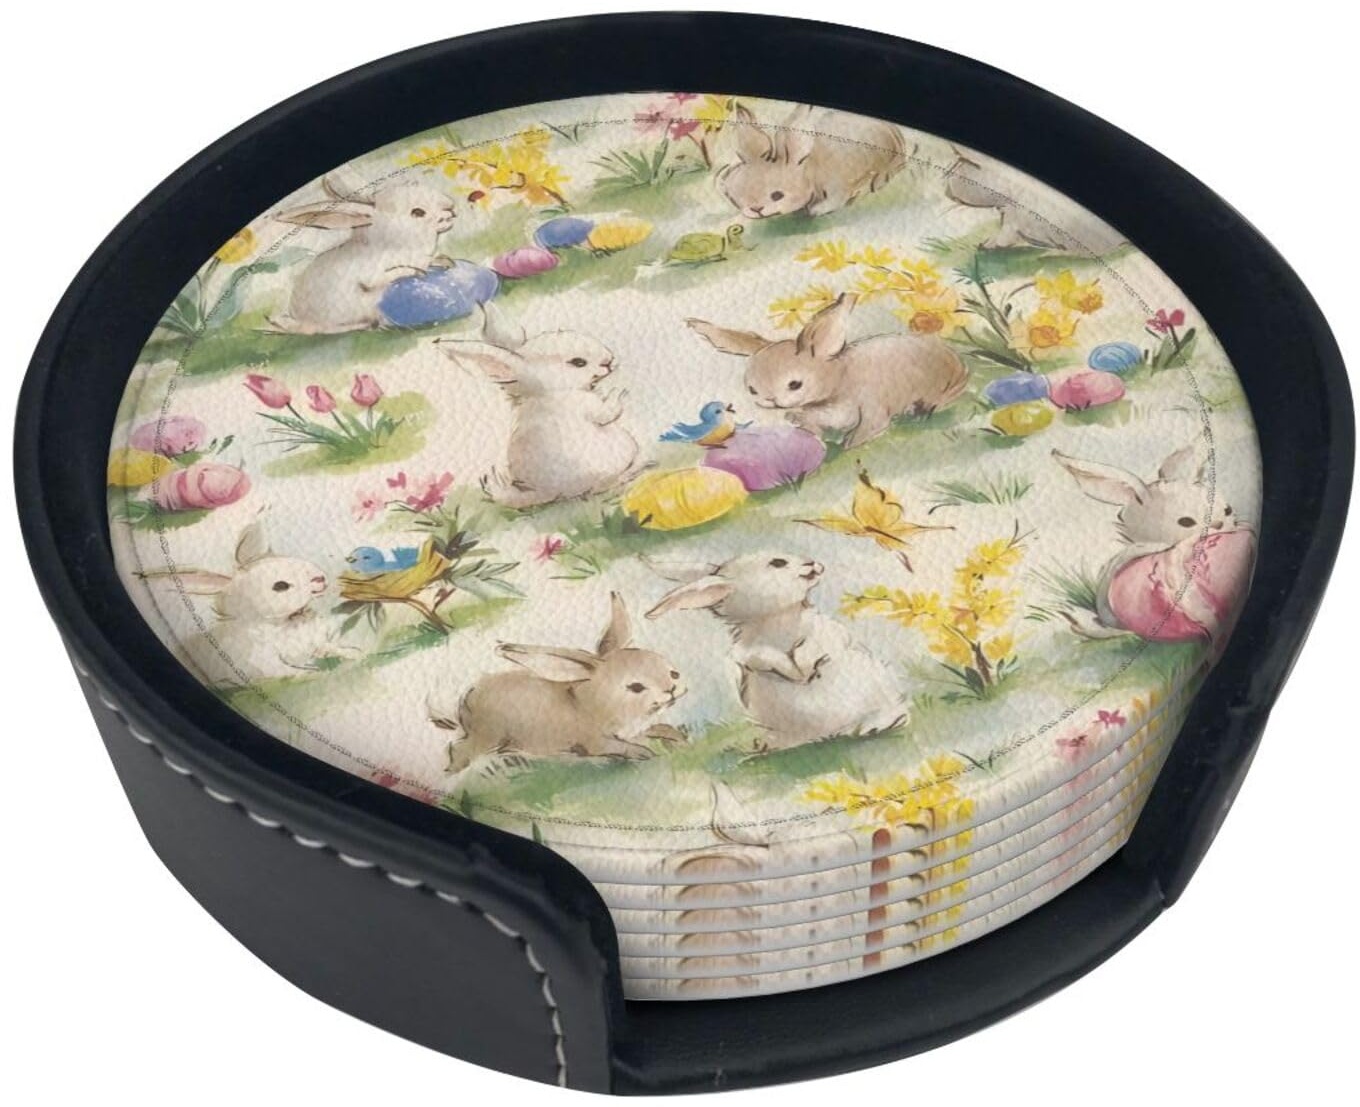 Vintage Flower Rabbit Bunny Easter Absorbent Coasters for Drinks with Holder, Leather Coasters Set of 6, Round Coasters for Coffee Table Desktop Home Decor